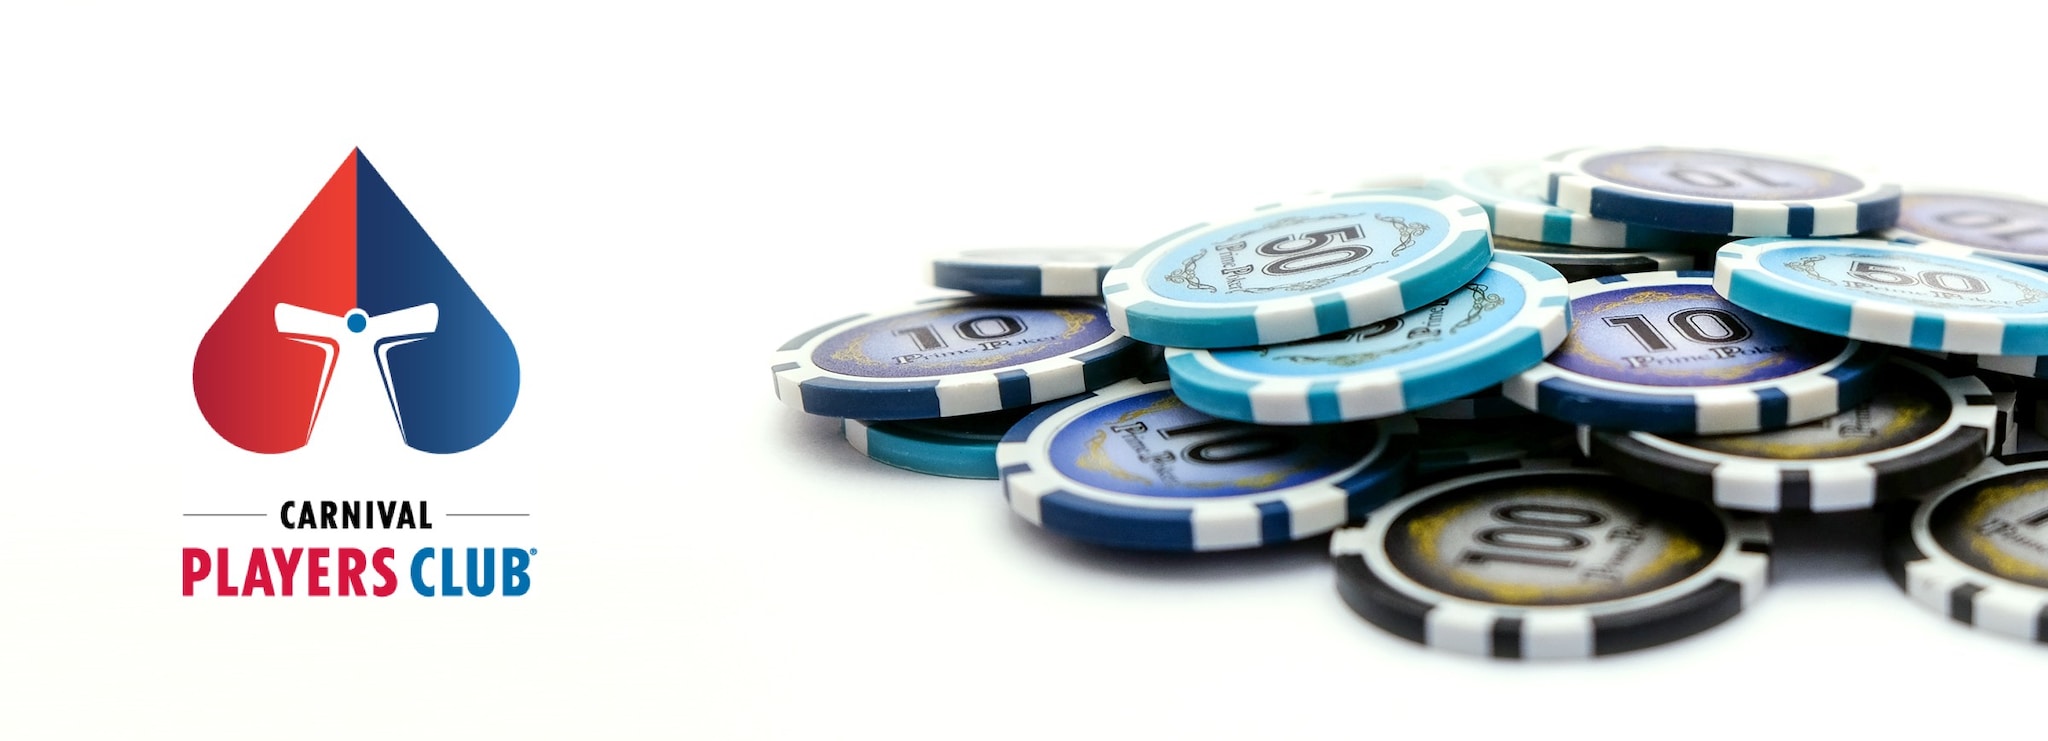 Carnival Players Club(R) Logo with Poker Chips